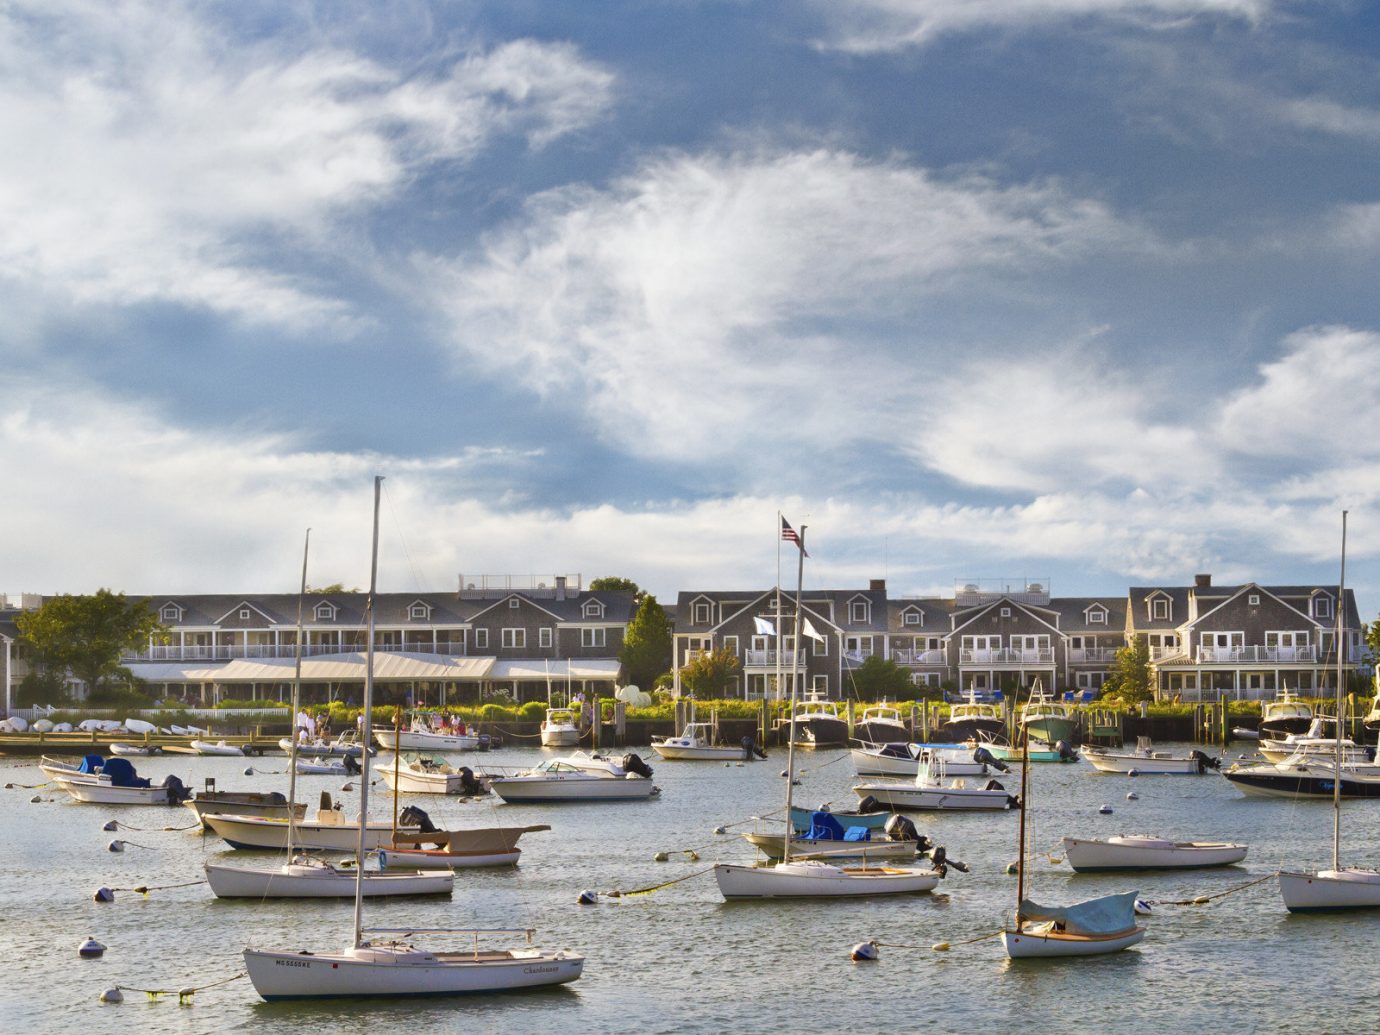 View of Nantucket Rhode Island from the harbor